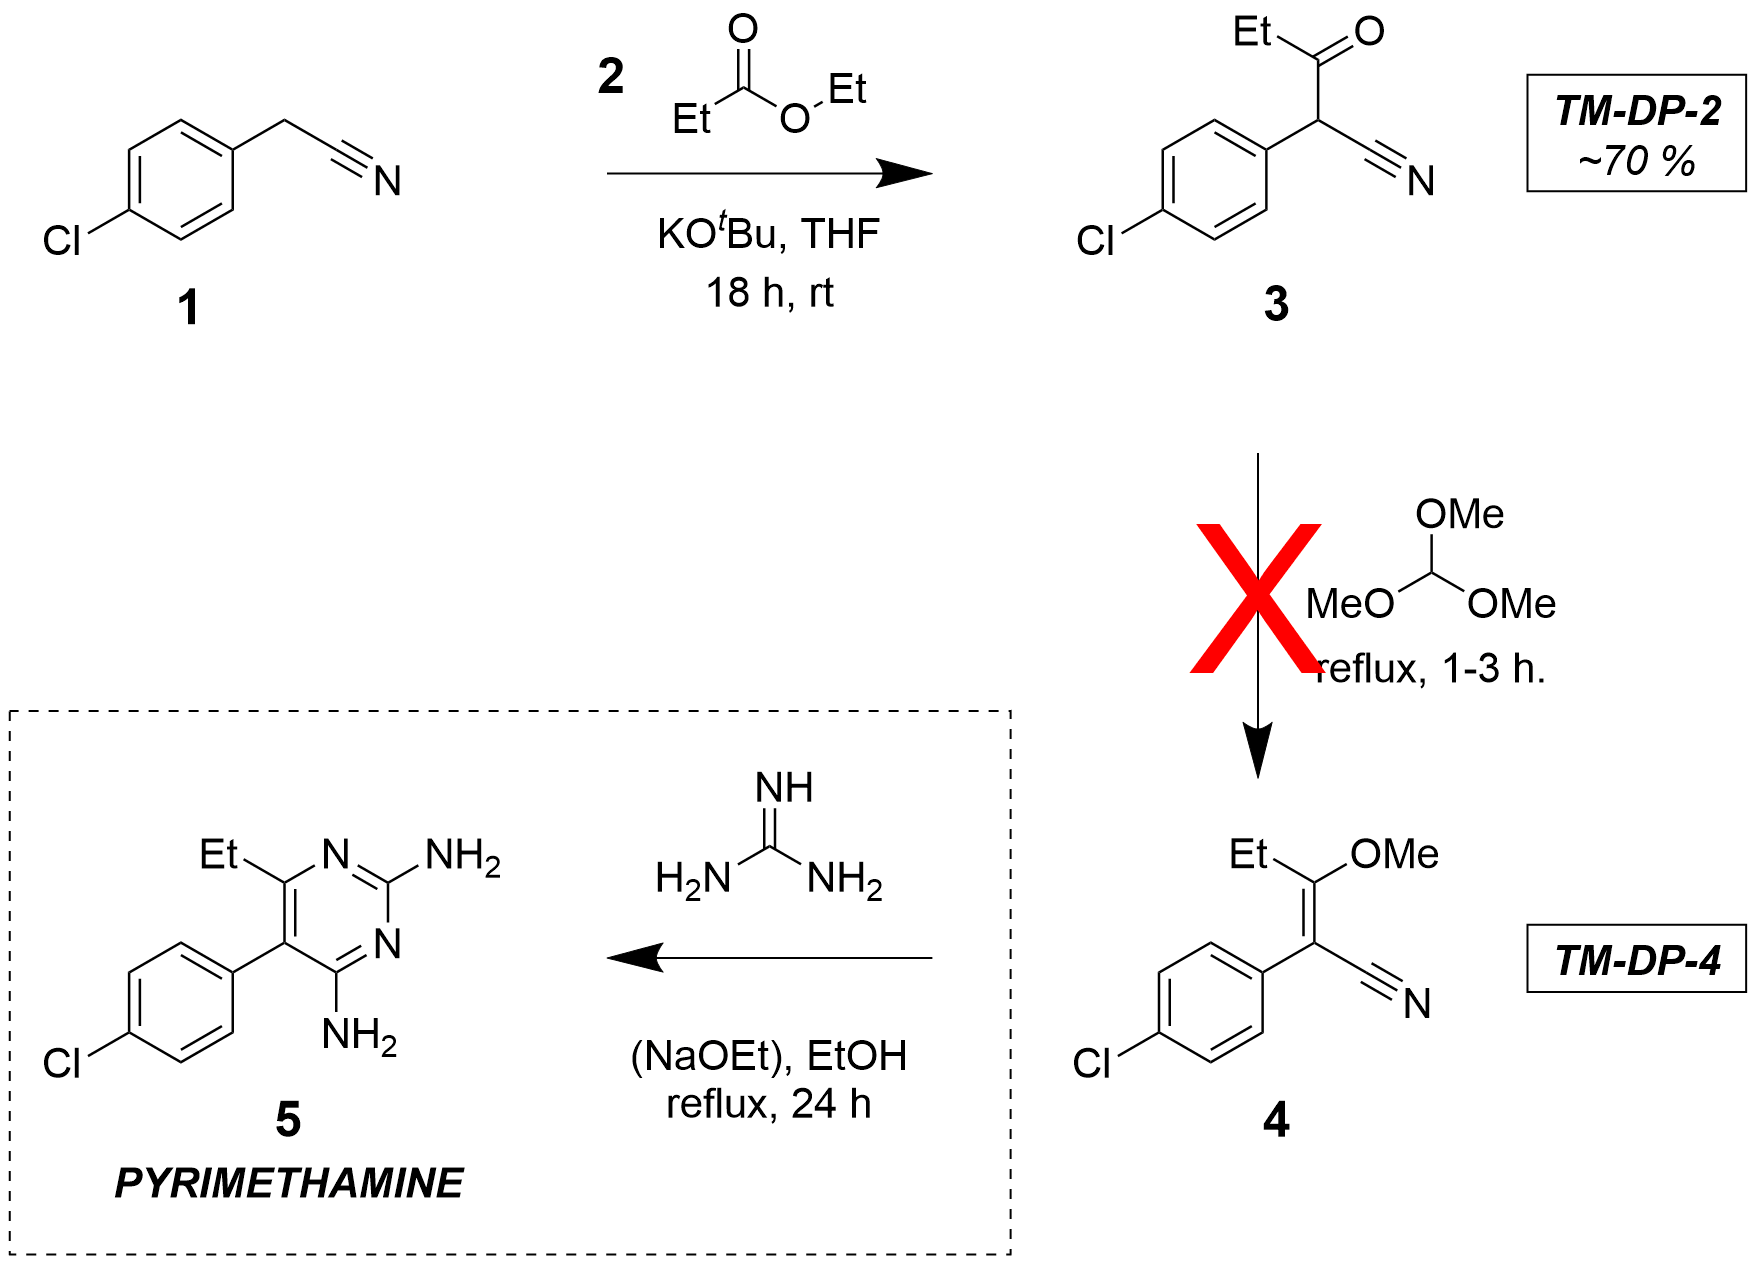 Pyrimethamine - attempted route